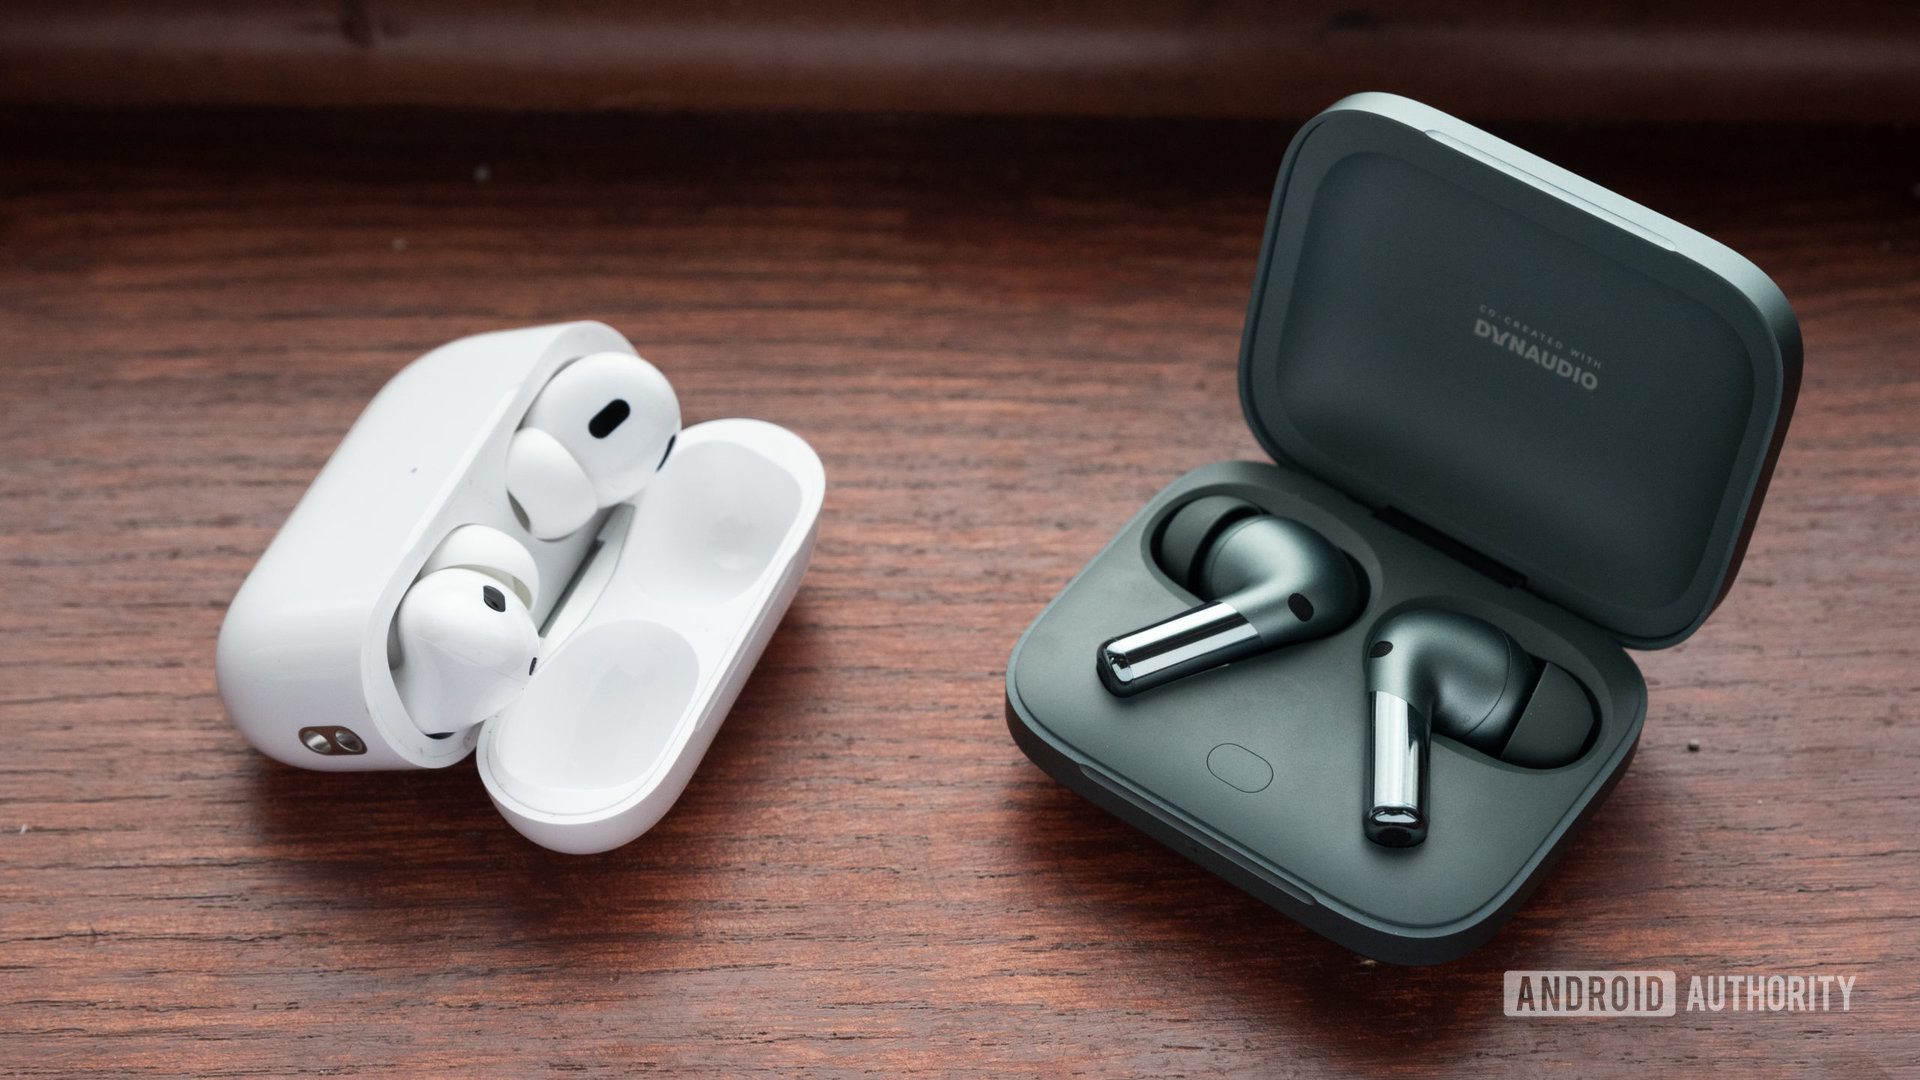 The Apple AirPods Pro (2nd generation) next to the OnePlus Buds Pro 2 in headphone deals